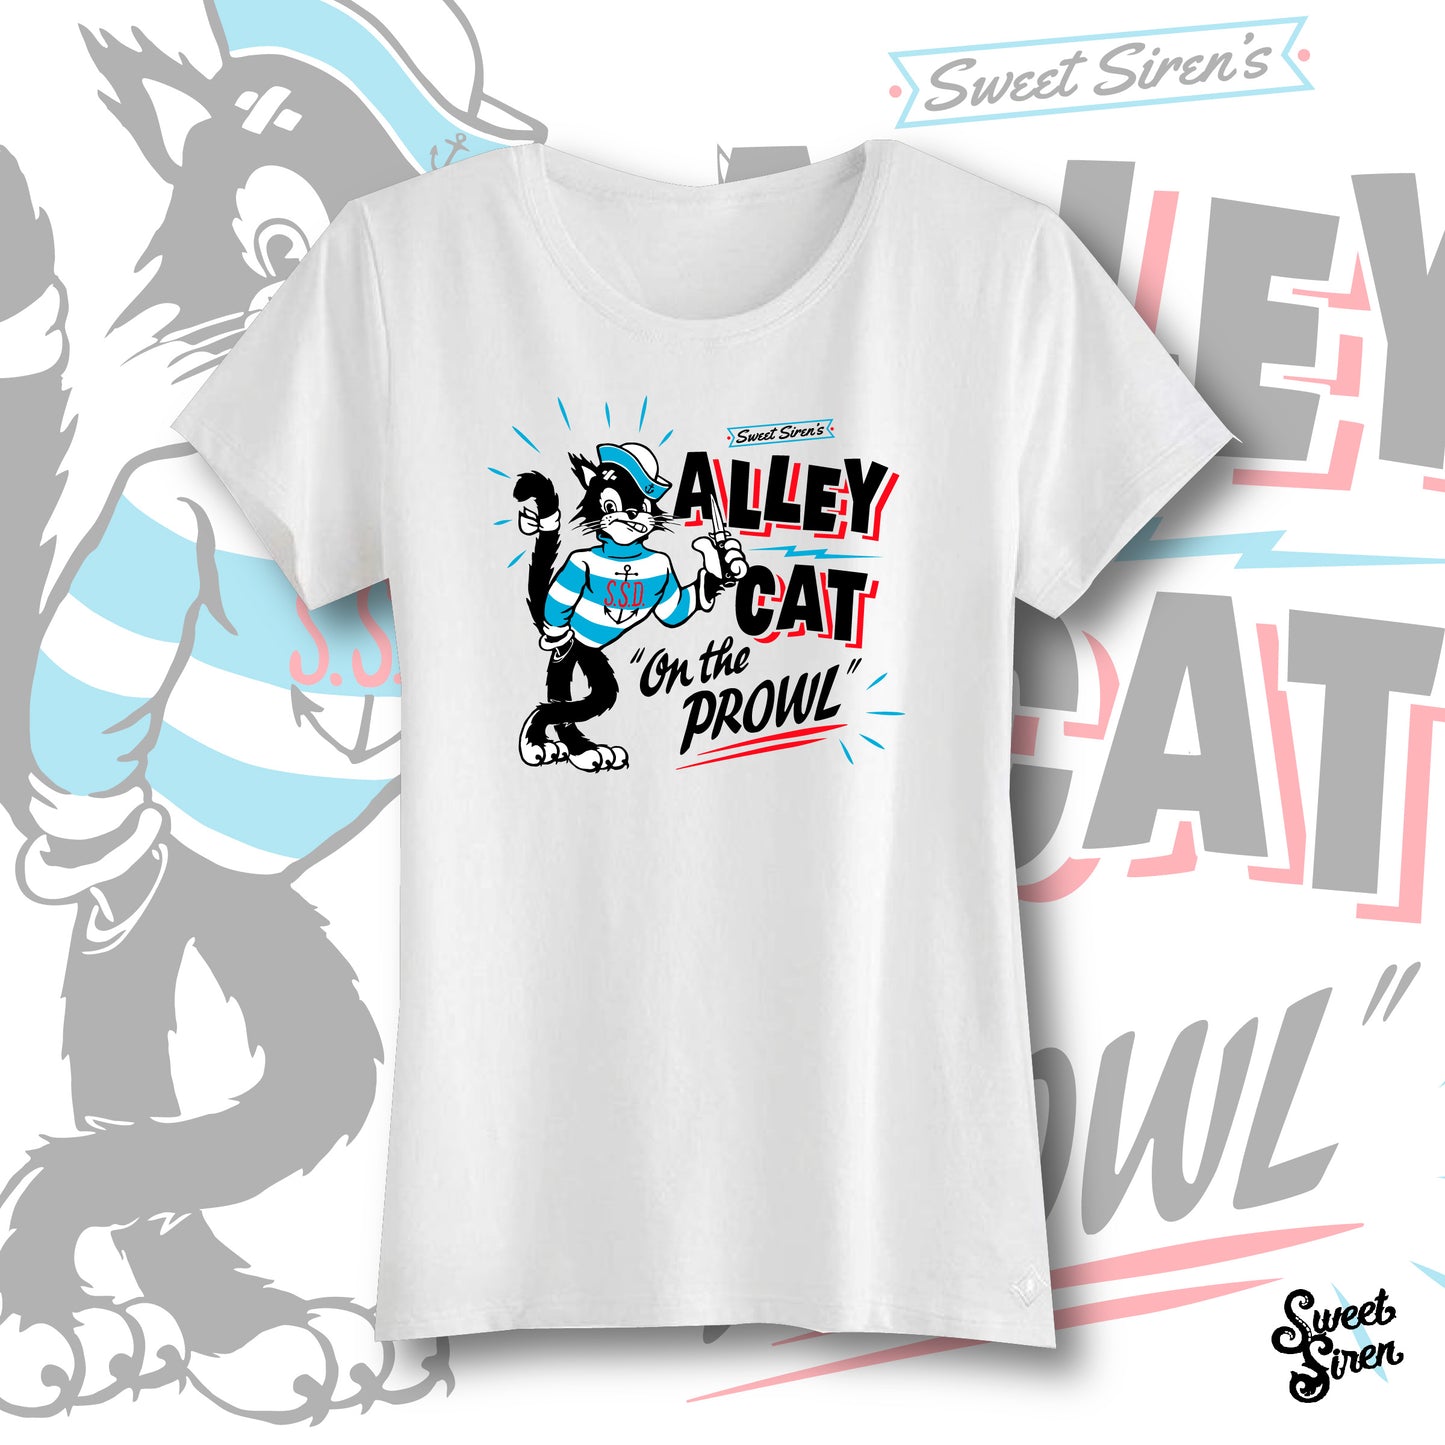 Alley Cat on the Prowl - Women's Tee